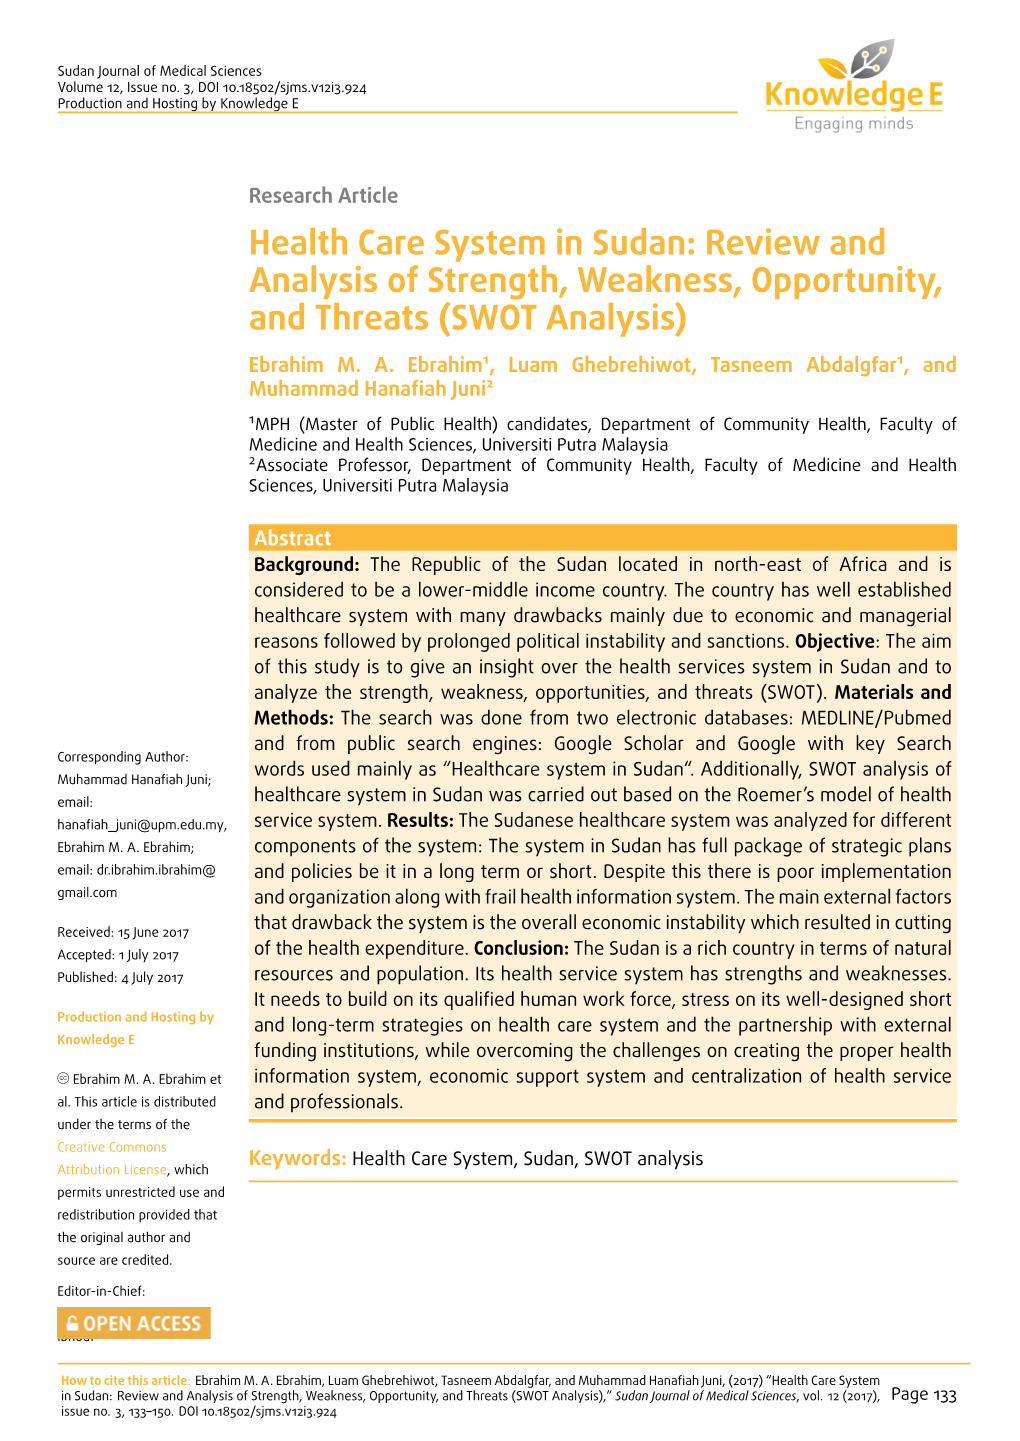 Health Care System in Sudan: Review and Analysis of Strength, Weakness, Opportunity, and Threats (SWOT Analysis) Ebrahim M